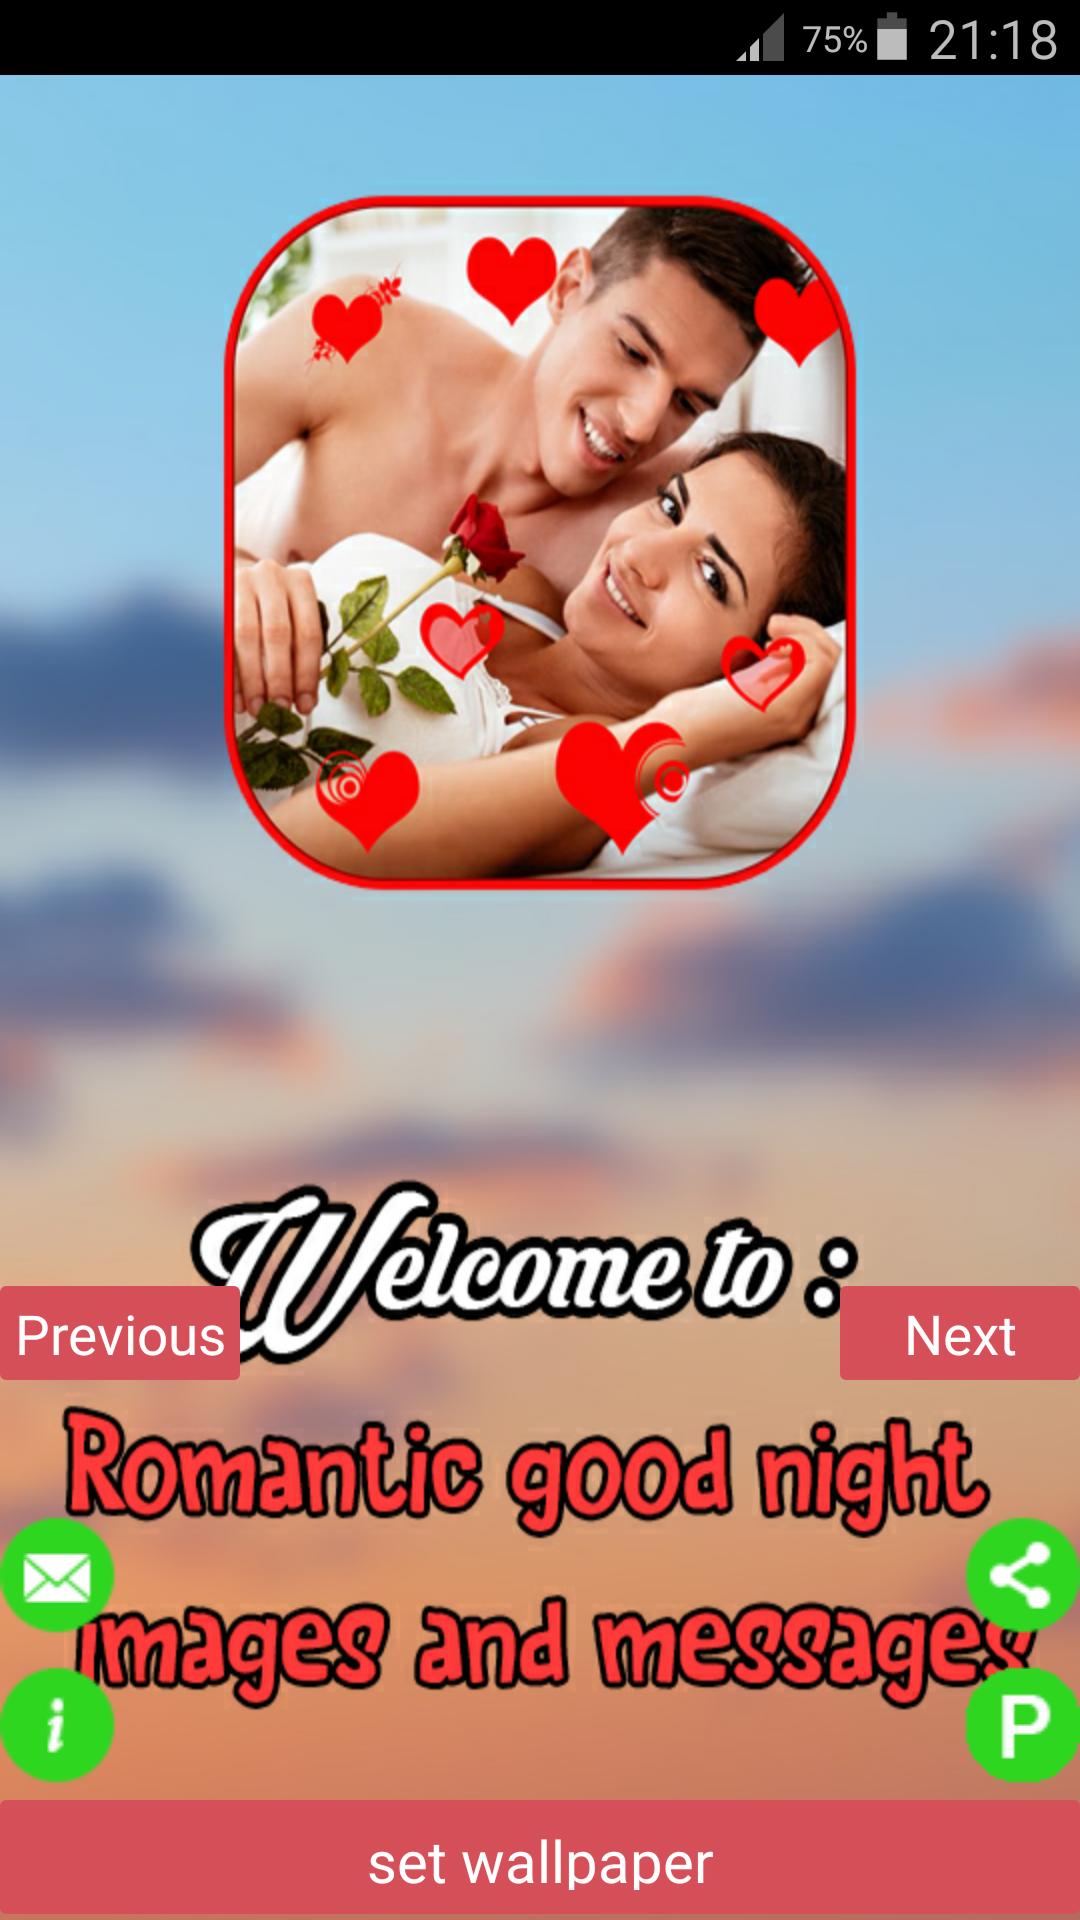 Romantic Couples Good Night HD Images Messages For Android APK